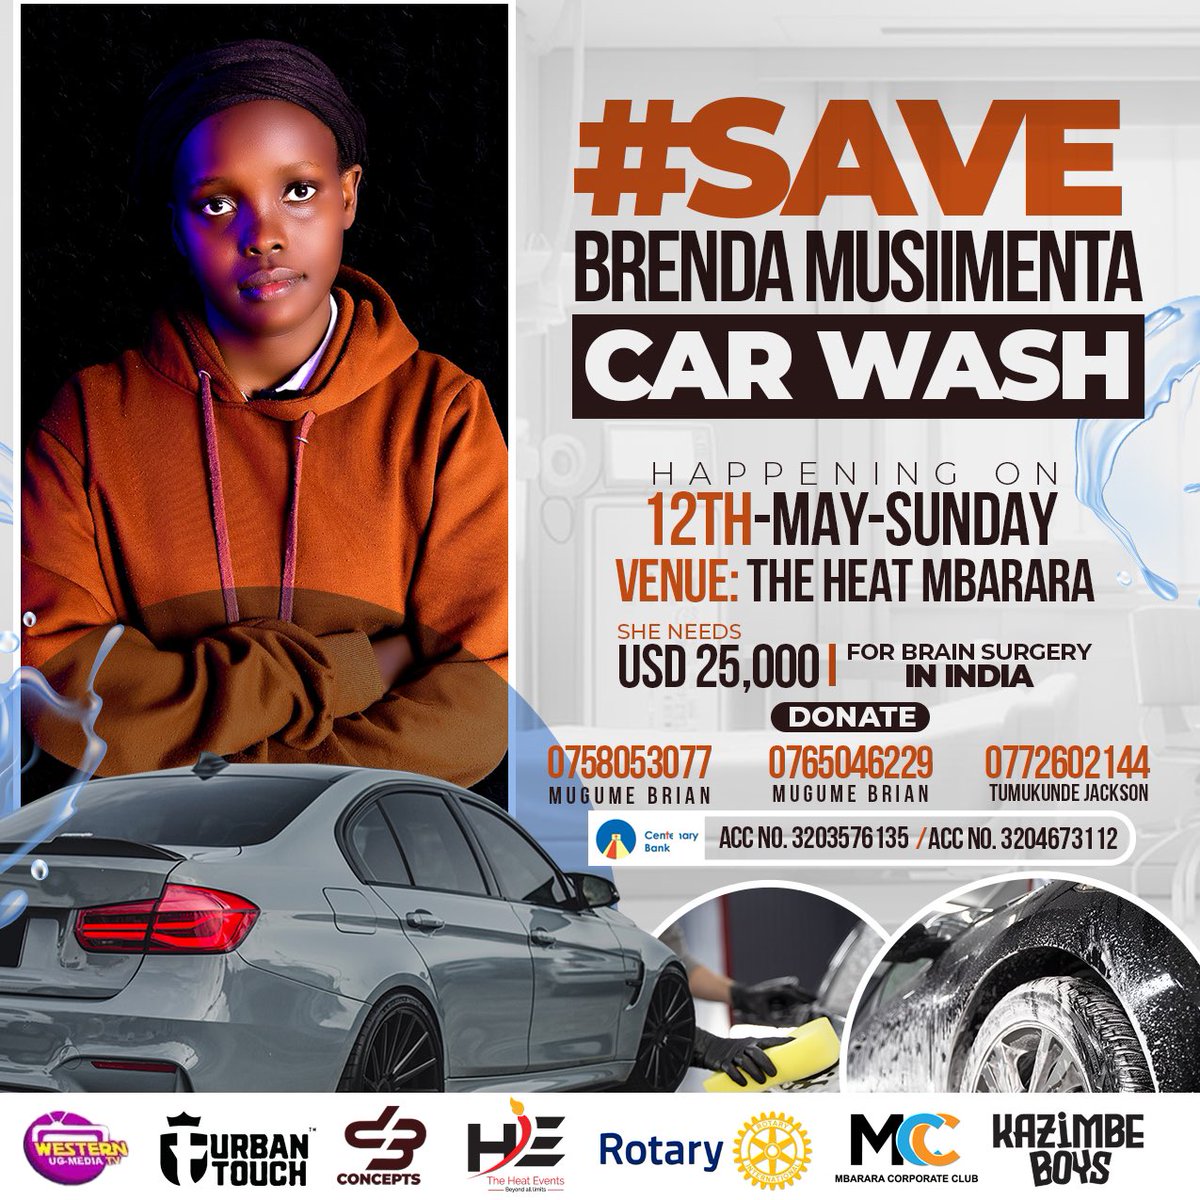 Giving doesn’t only precede receiving; it’s the reason for it. It’s in giving that we receive. Help without any reason and give without expectation of receiving anything in return. Let’s all come together to save my Sister. 🙏🏾 #SaveBrendaMusiimenta #SaveBrendaMusiimentaCarWash